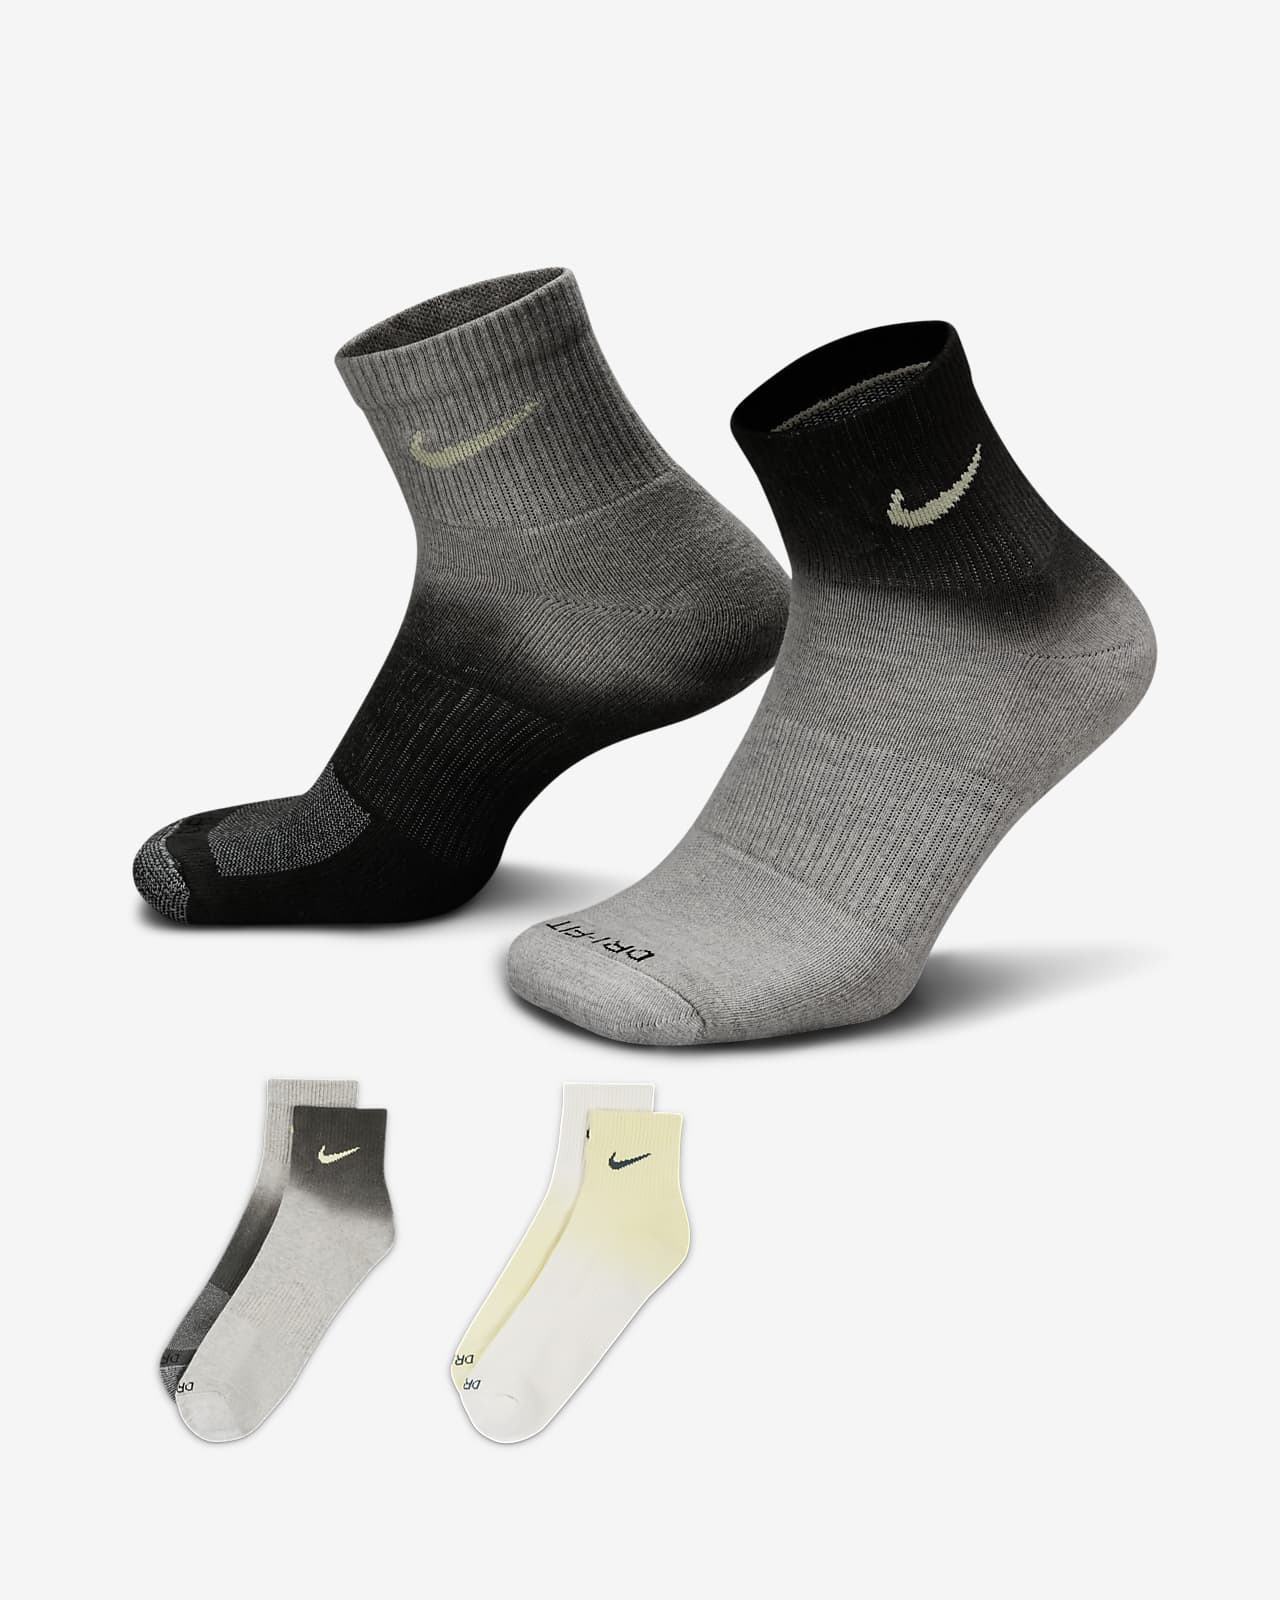 https://static.nike.com/a/images/t_PDP_1280_v1/f_auto,q_auto:eco/5fccf6db-04cf-4a80-9212-288ca105f209/everyday-plus-cushioned-ankle-socks-tVFqlN.png